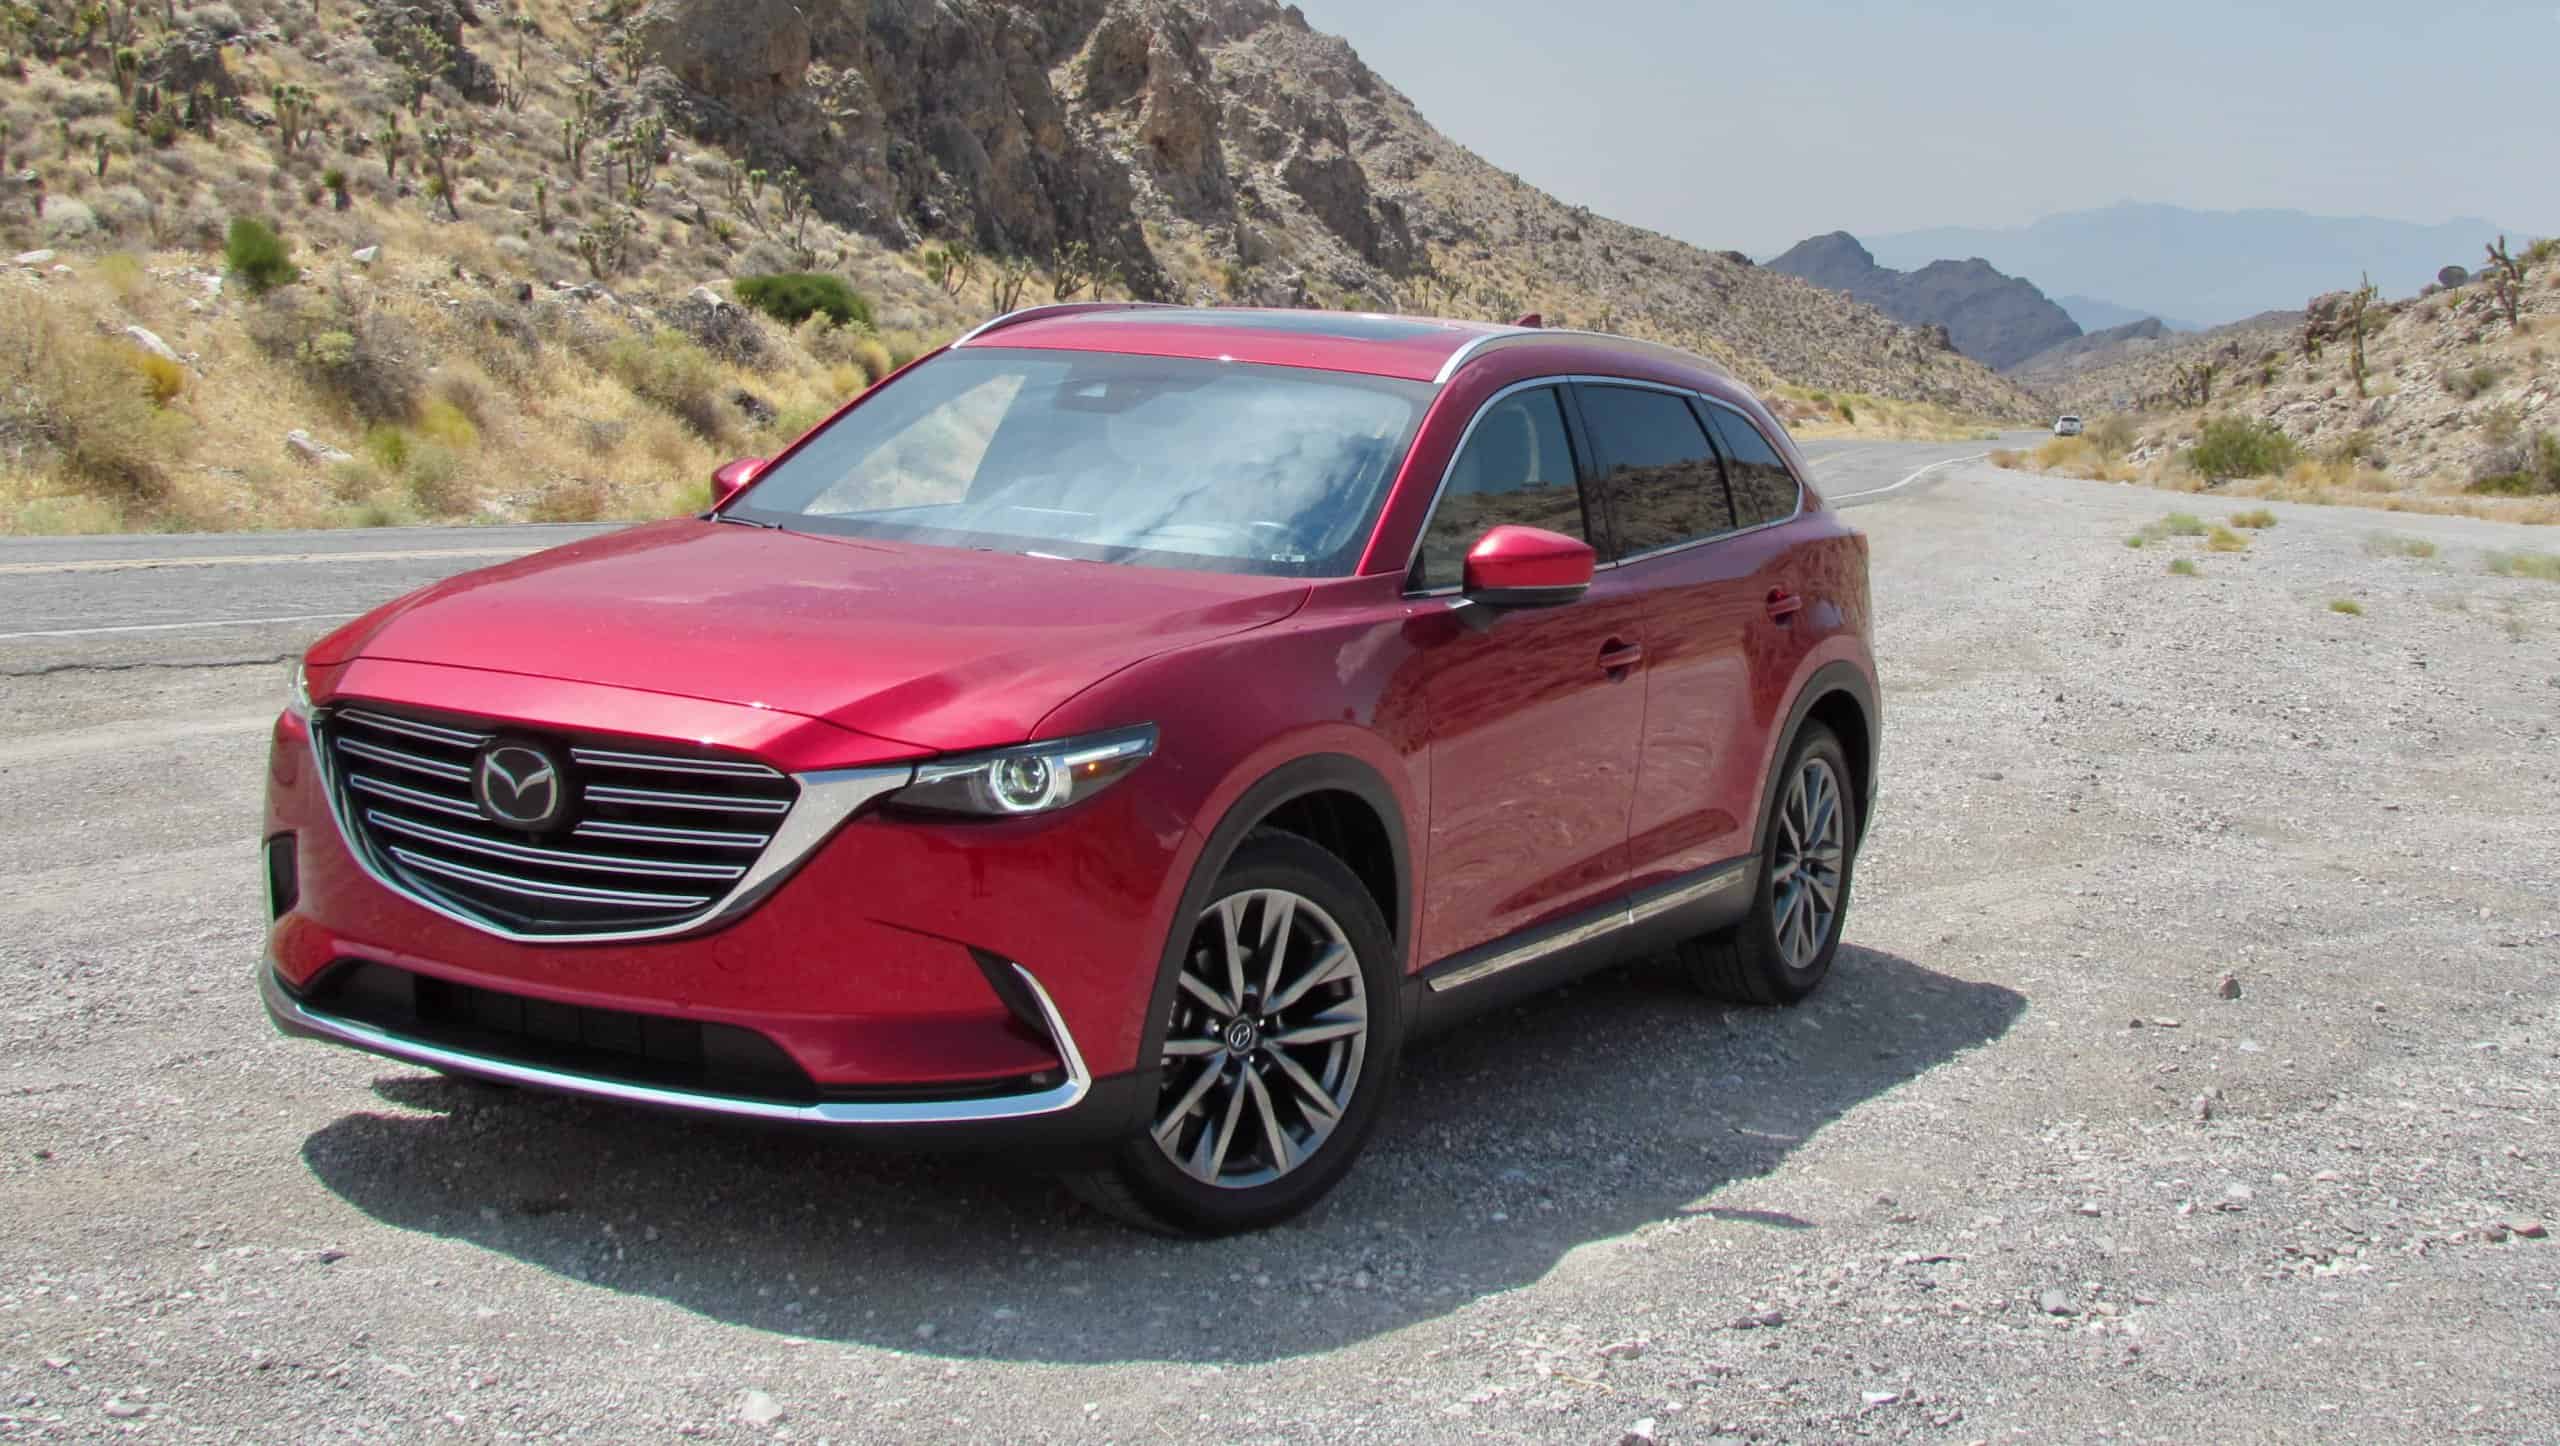 Driven Mazda CX9 has 3 rows of fun for the family, and